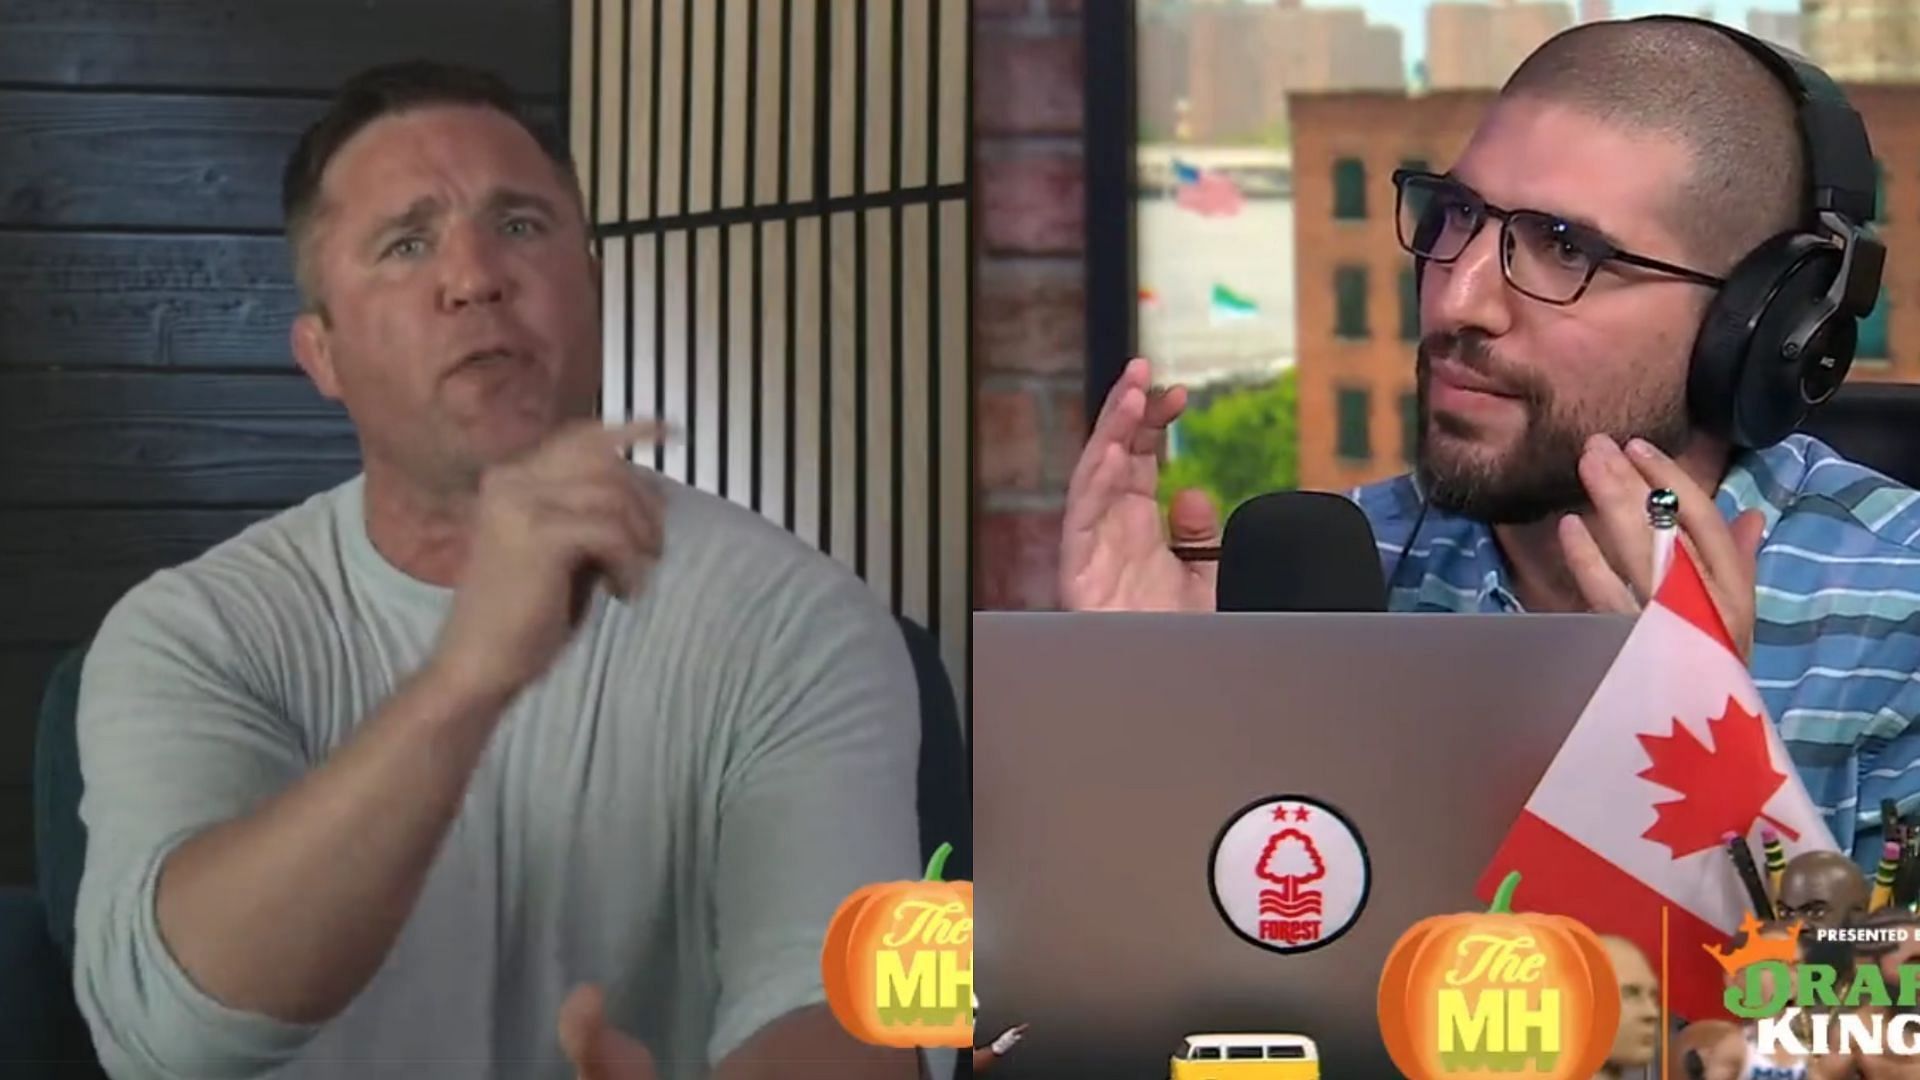 Chael Sonnen (left), Ariel Helwani (right) [Images courtesy of The MMA Hour on YouTube]